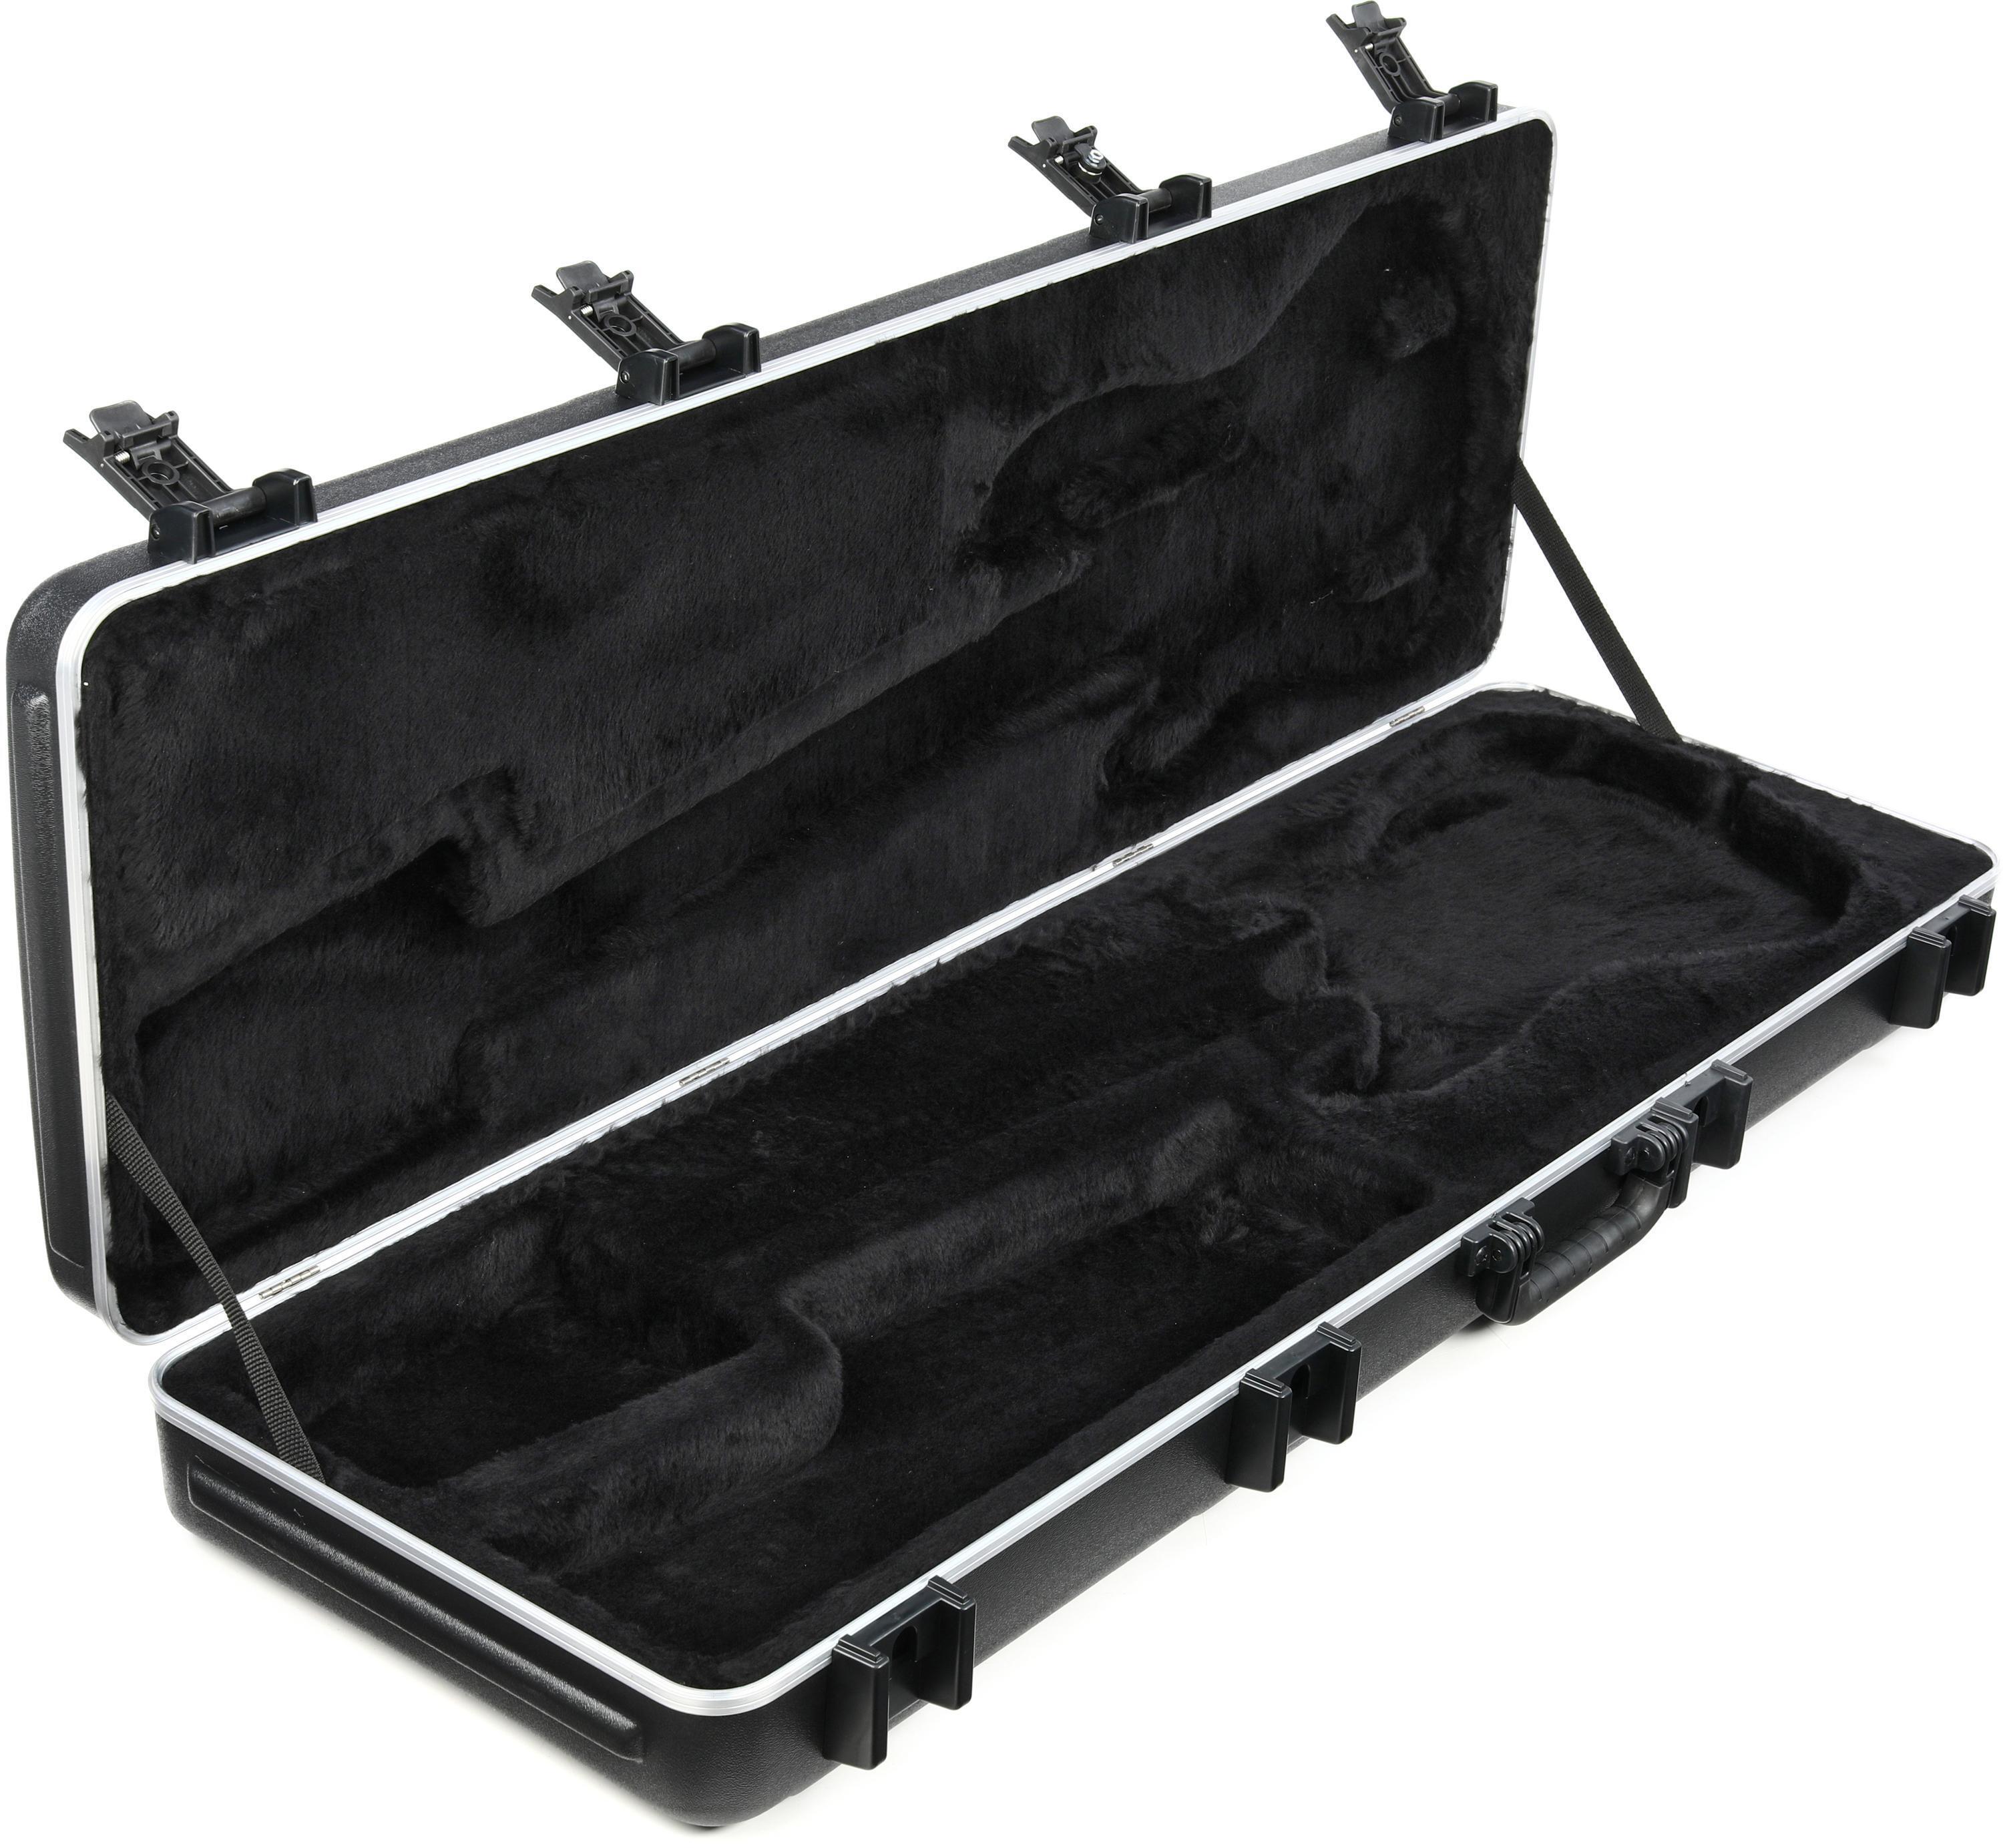 Fender Deluxe Molded Bass Case - Black | Sweetwater